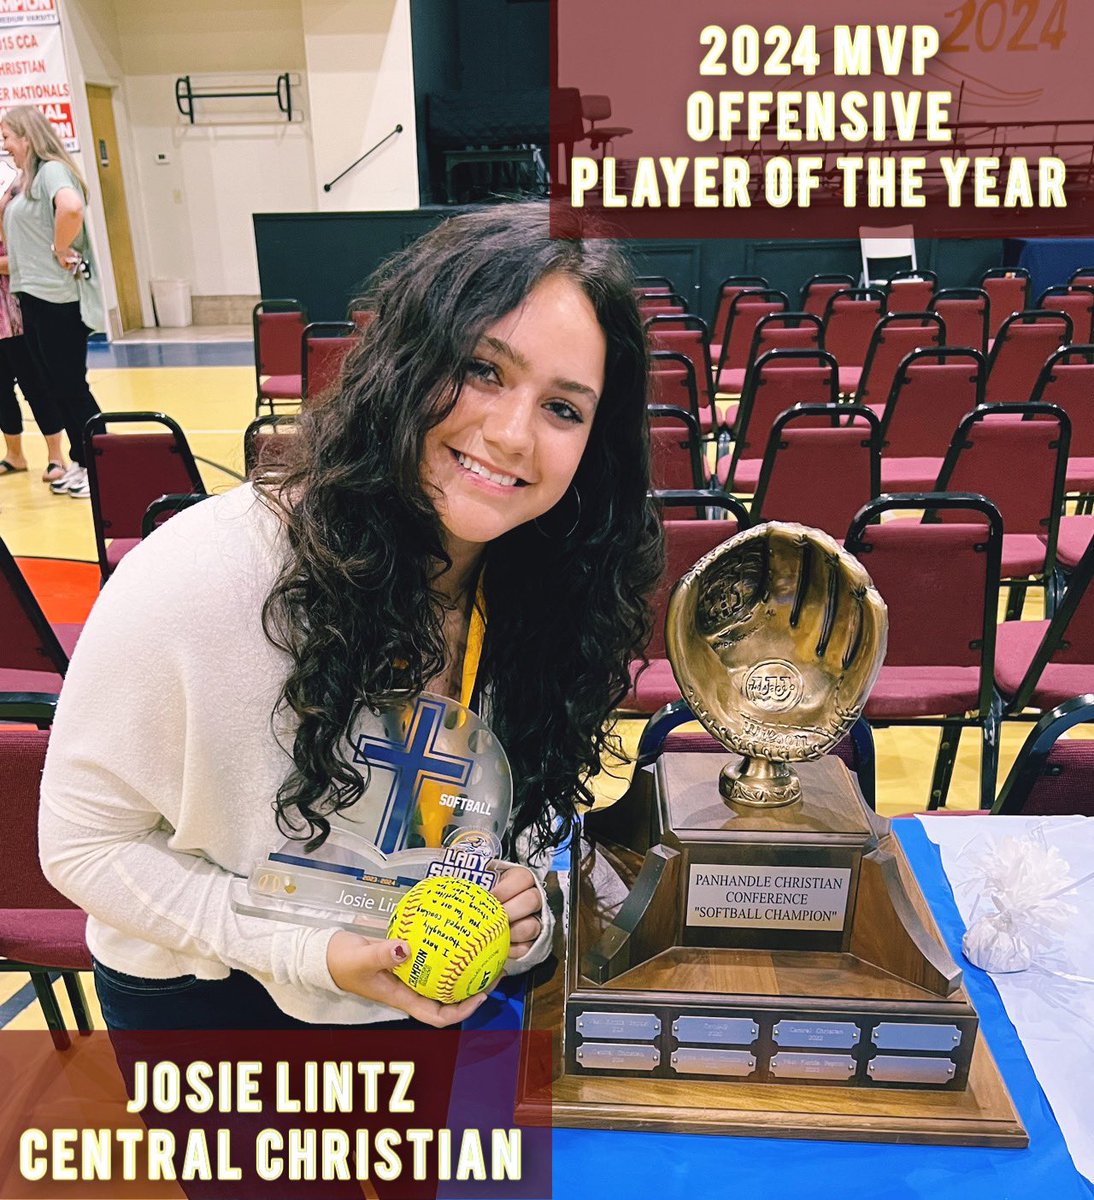 Central Christian Awards Ceremony. Thank you to CCS for the amazing year, memories, and Final Four Championship! @SF16UWarman @GCMSportsAL @SoftballDown @UWAA_United @2029Sophie #softball #fastpitch #christianathletics #femaleathletes #mvp